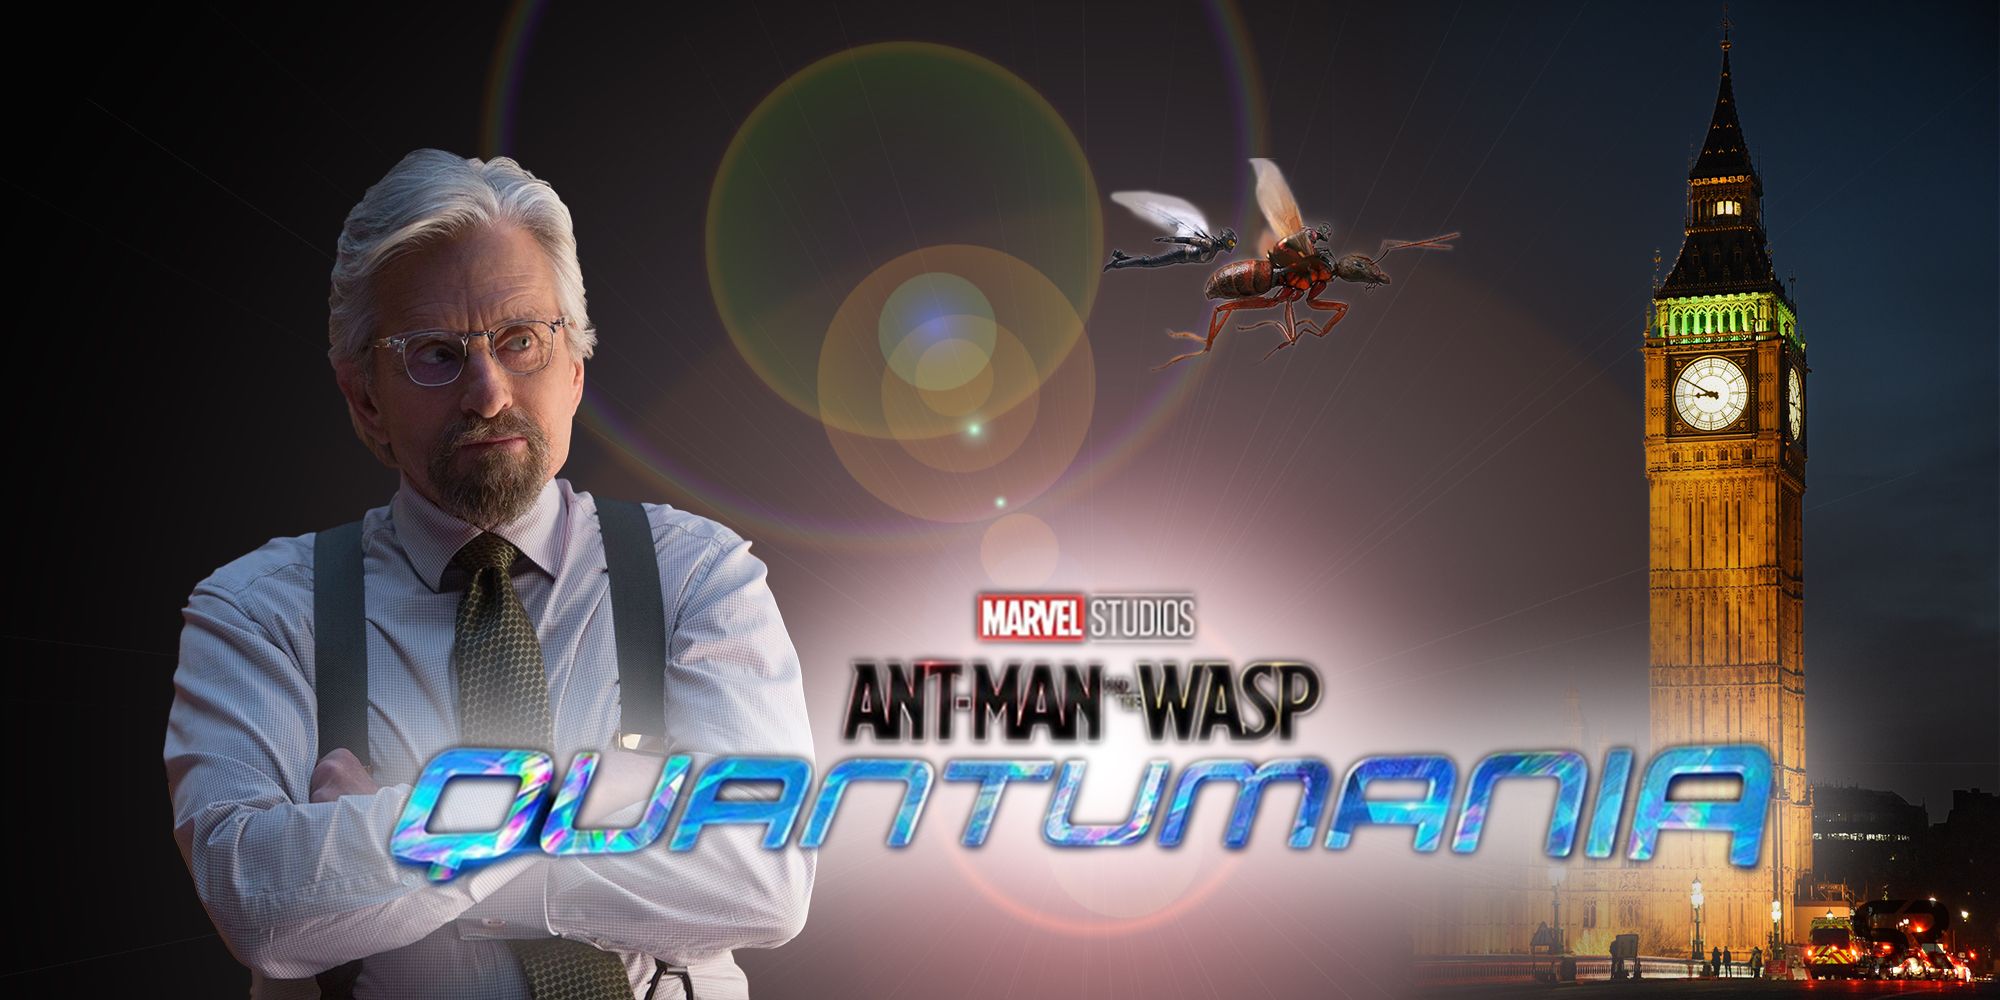 Ant-Man 3 filming in London in July says Michael Douglas